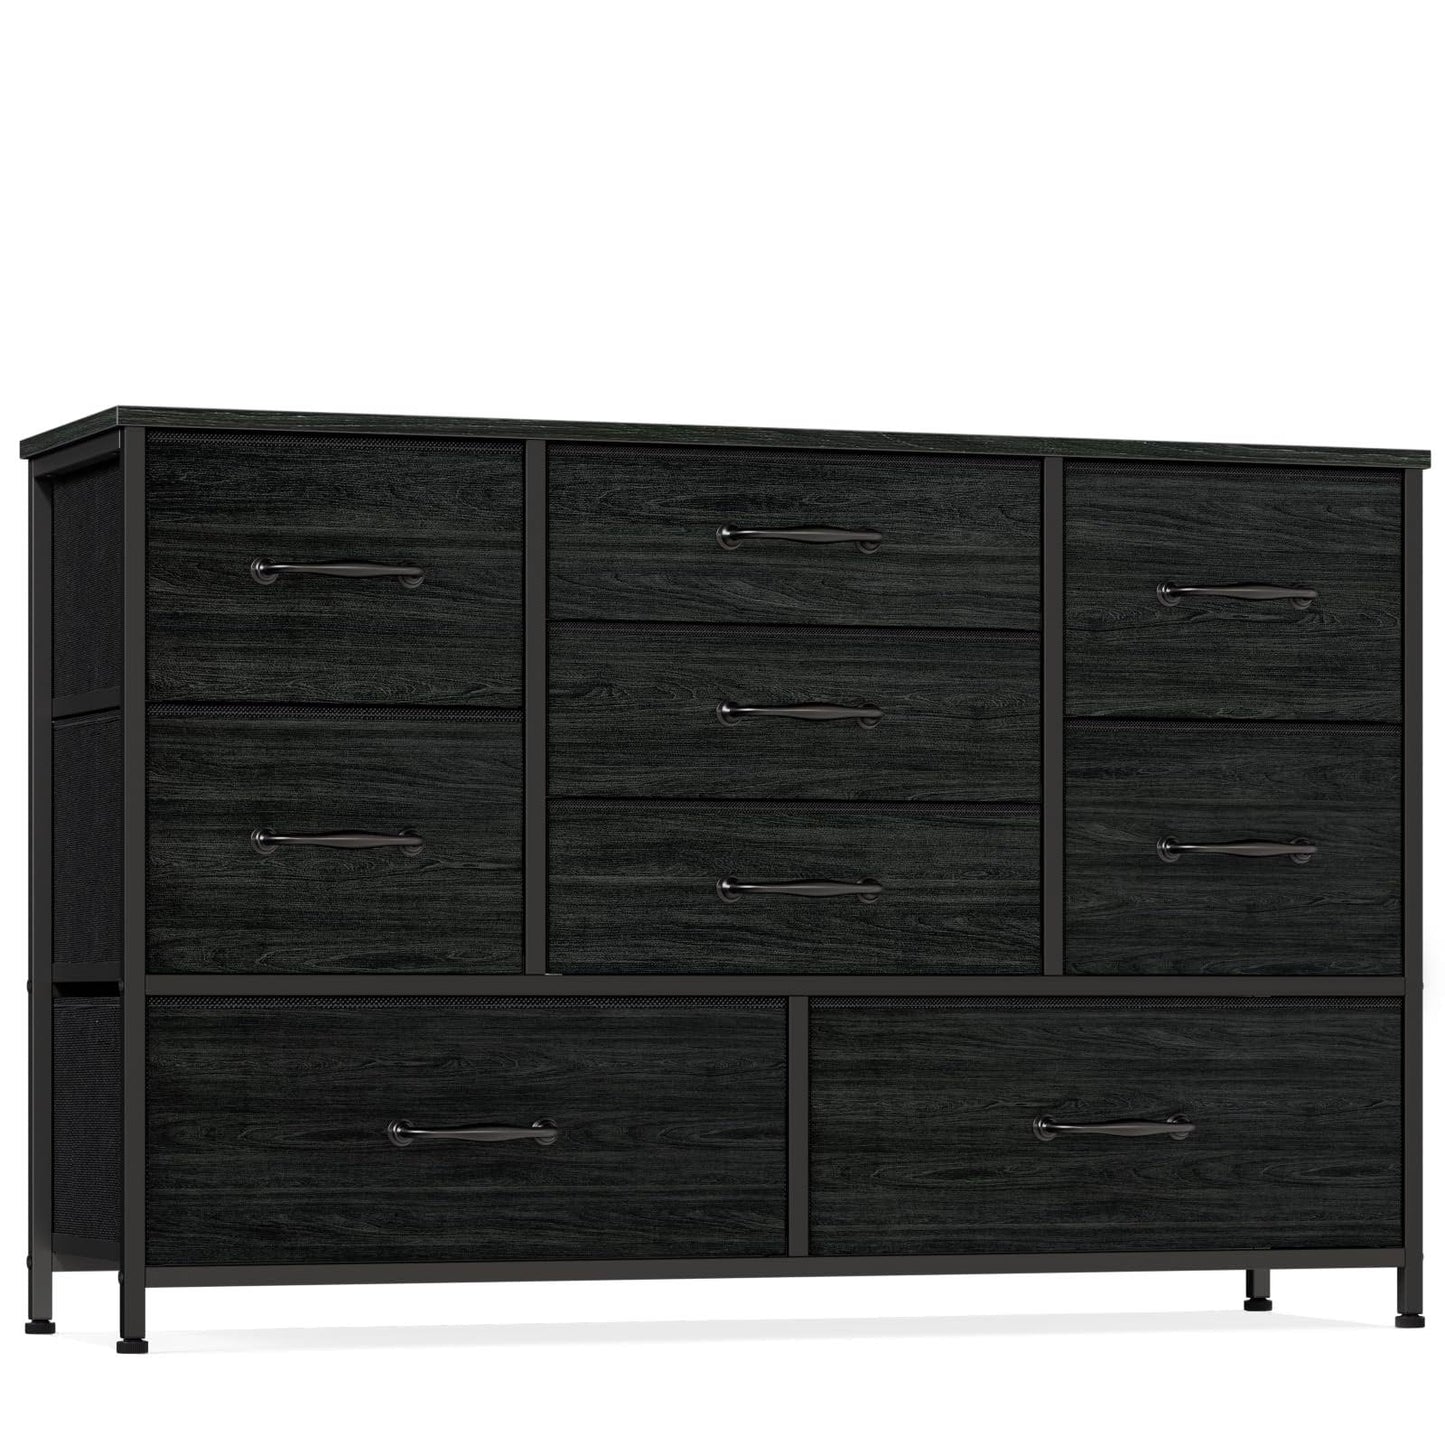 Wide Dresser With 9 Large Drawers For 55 Long Tv Stand Entertainment Center,Wood Shelf Storage For Bedroom,Living Room,Closet,Entryway